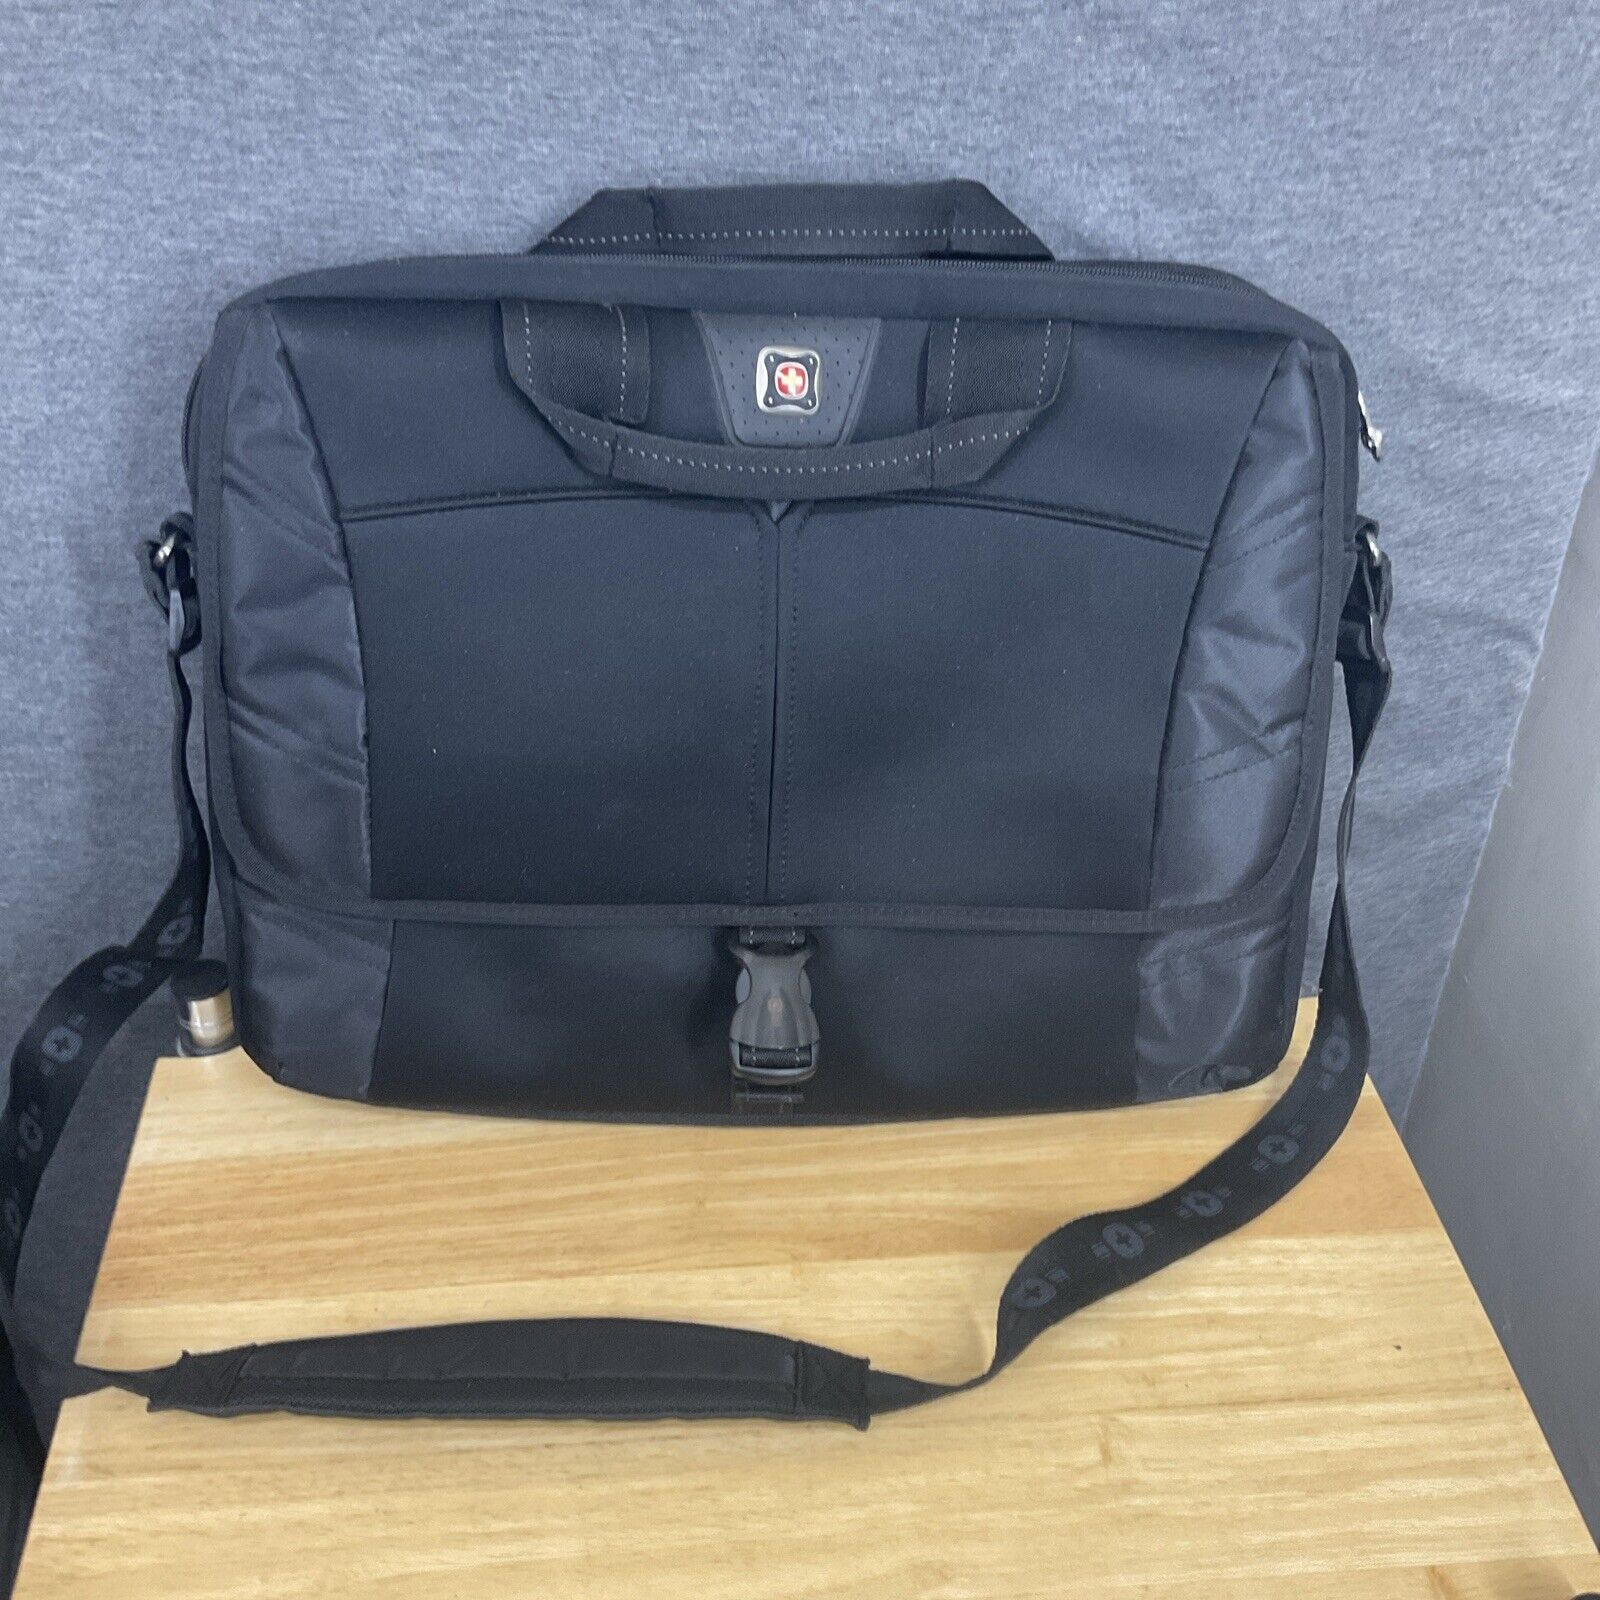 Swiss Army Wenger Blk/Blk Polyester Comp Slimcase Computer Sleeve 092837743366